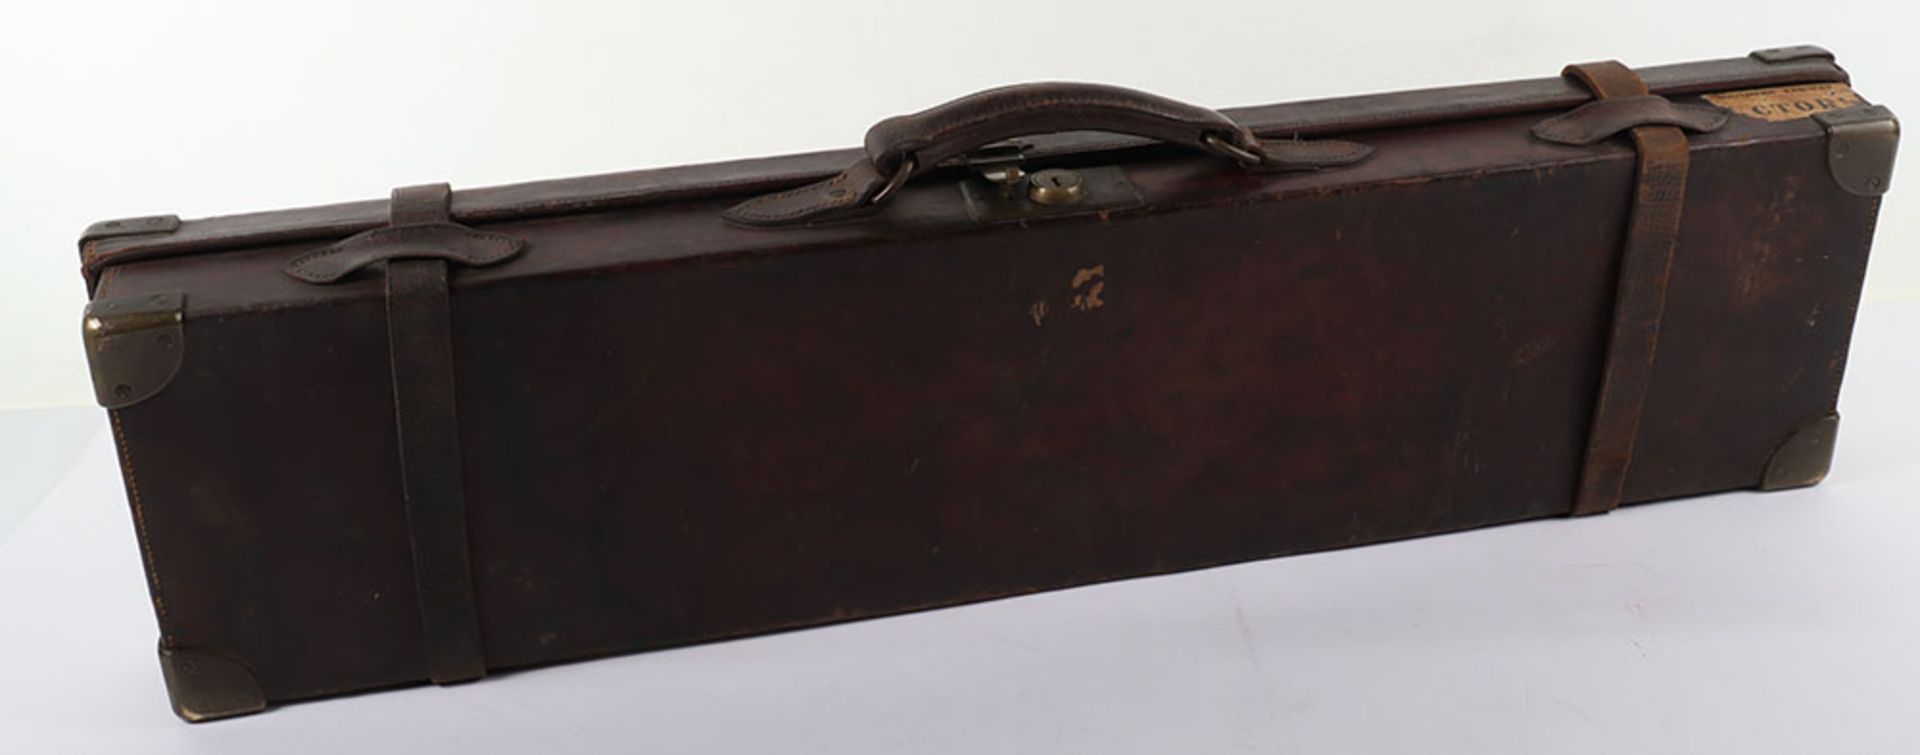 20th century leather and brass mounted single gun case - Image 8 of 9